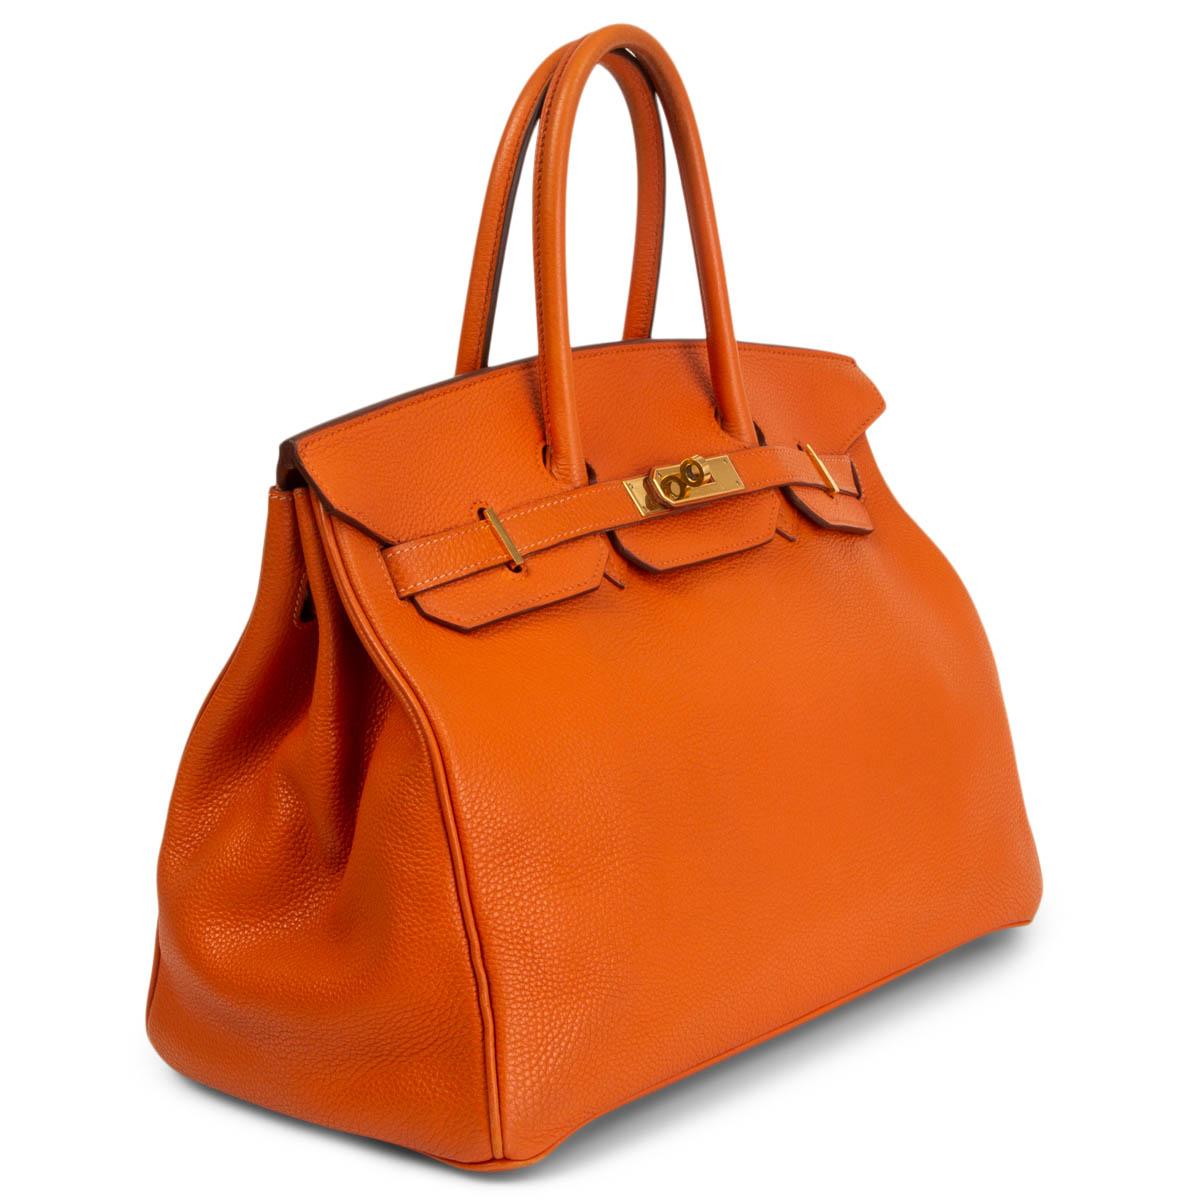 100% authentic Hermès 35 Birkin in orange soft Taurillone Clemence leather. Lined in Chèvre (goat skin) with an open pocket against the front and a zipper pocket against the back. Has been carried with some wear to the corners and handles. Overall